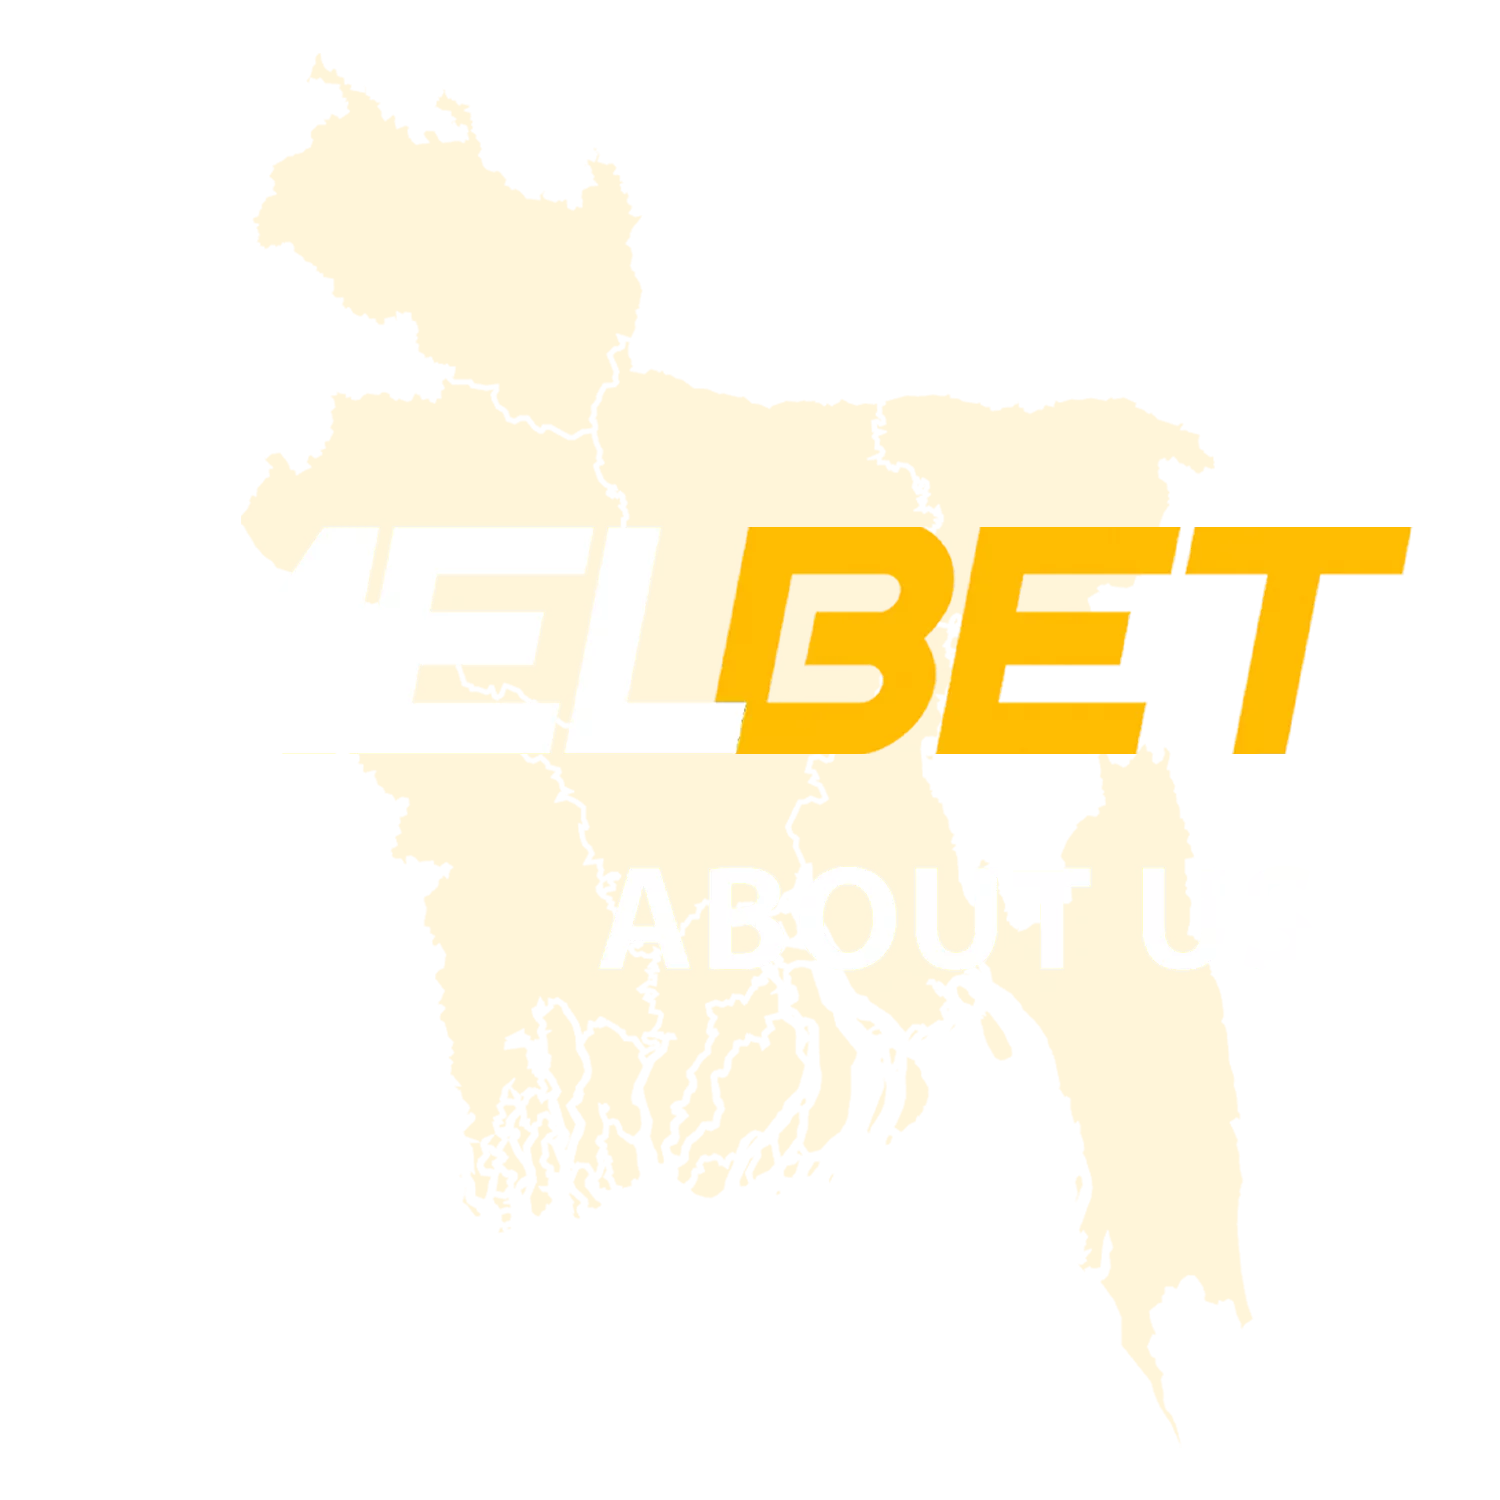 Basic information about Melbet for users from Bangladesh.